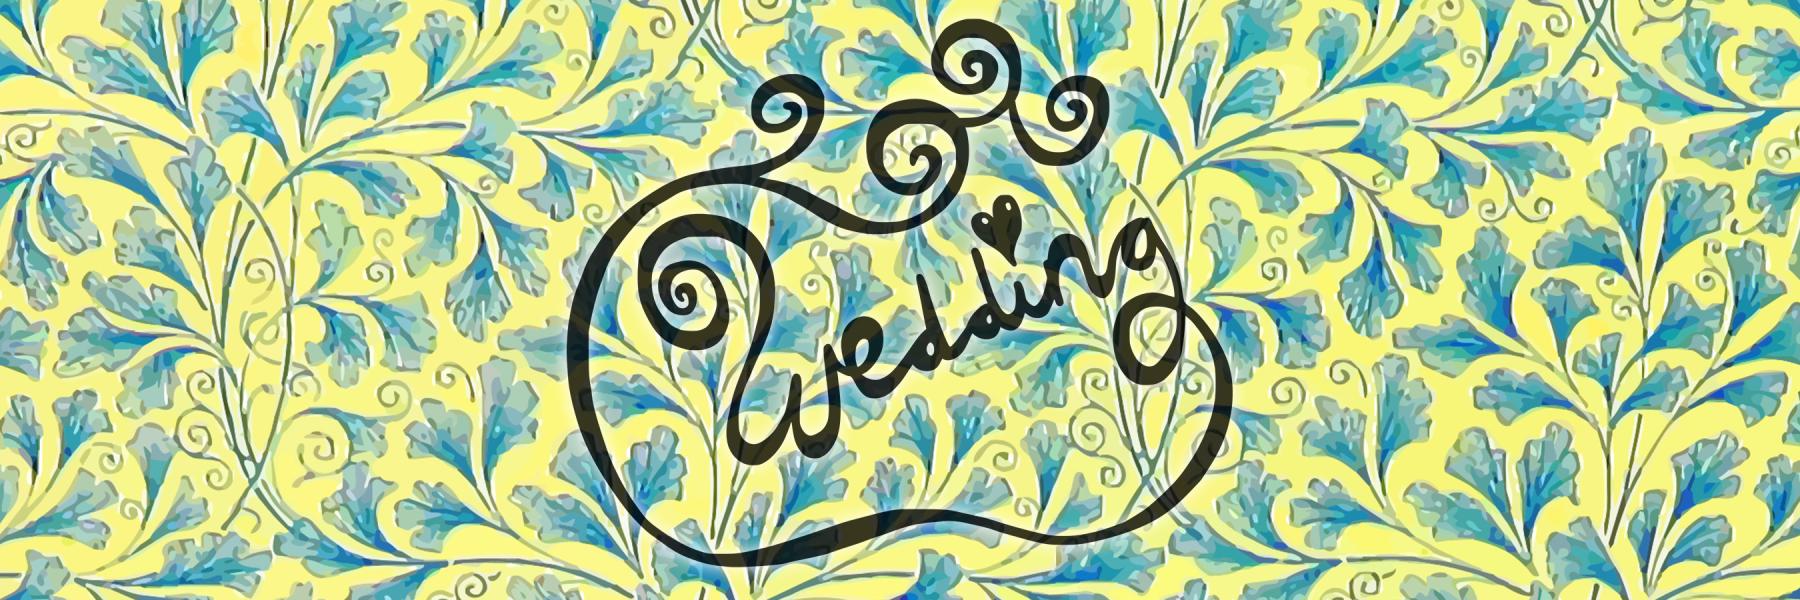 The word "Wedding" scripted over a blue and yellow wallpaper. 3:1